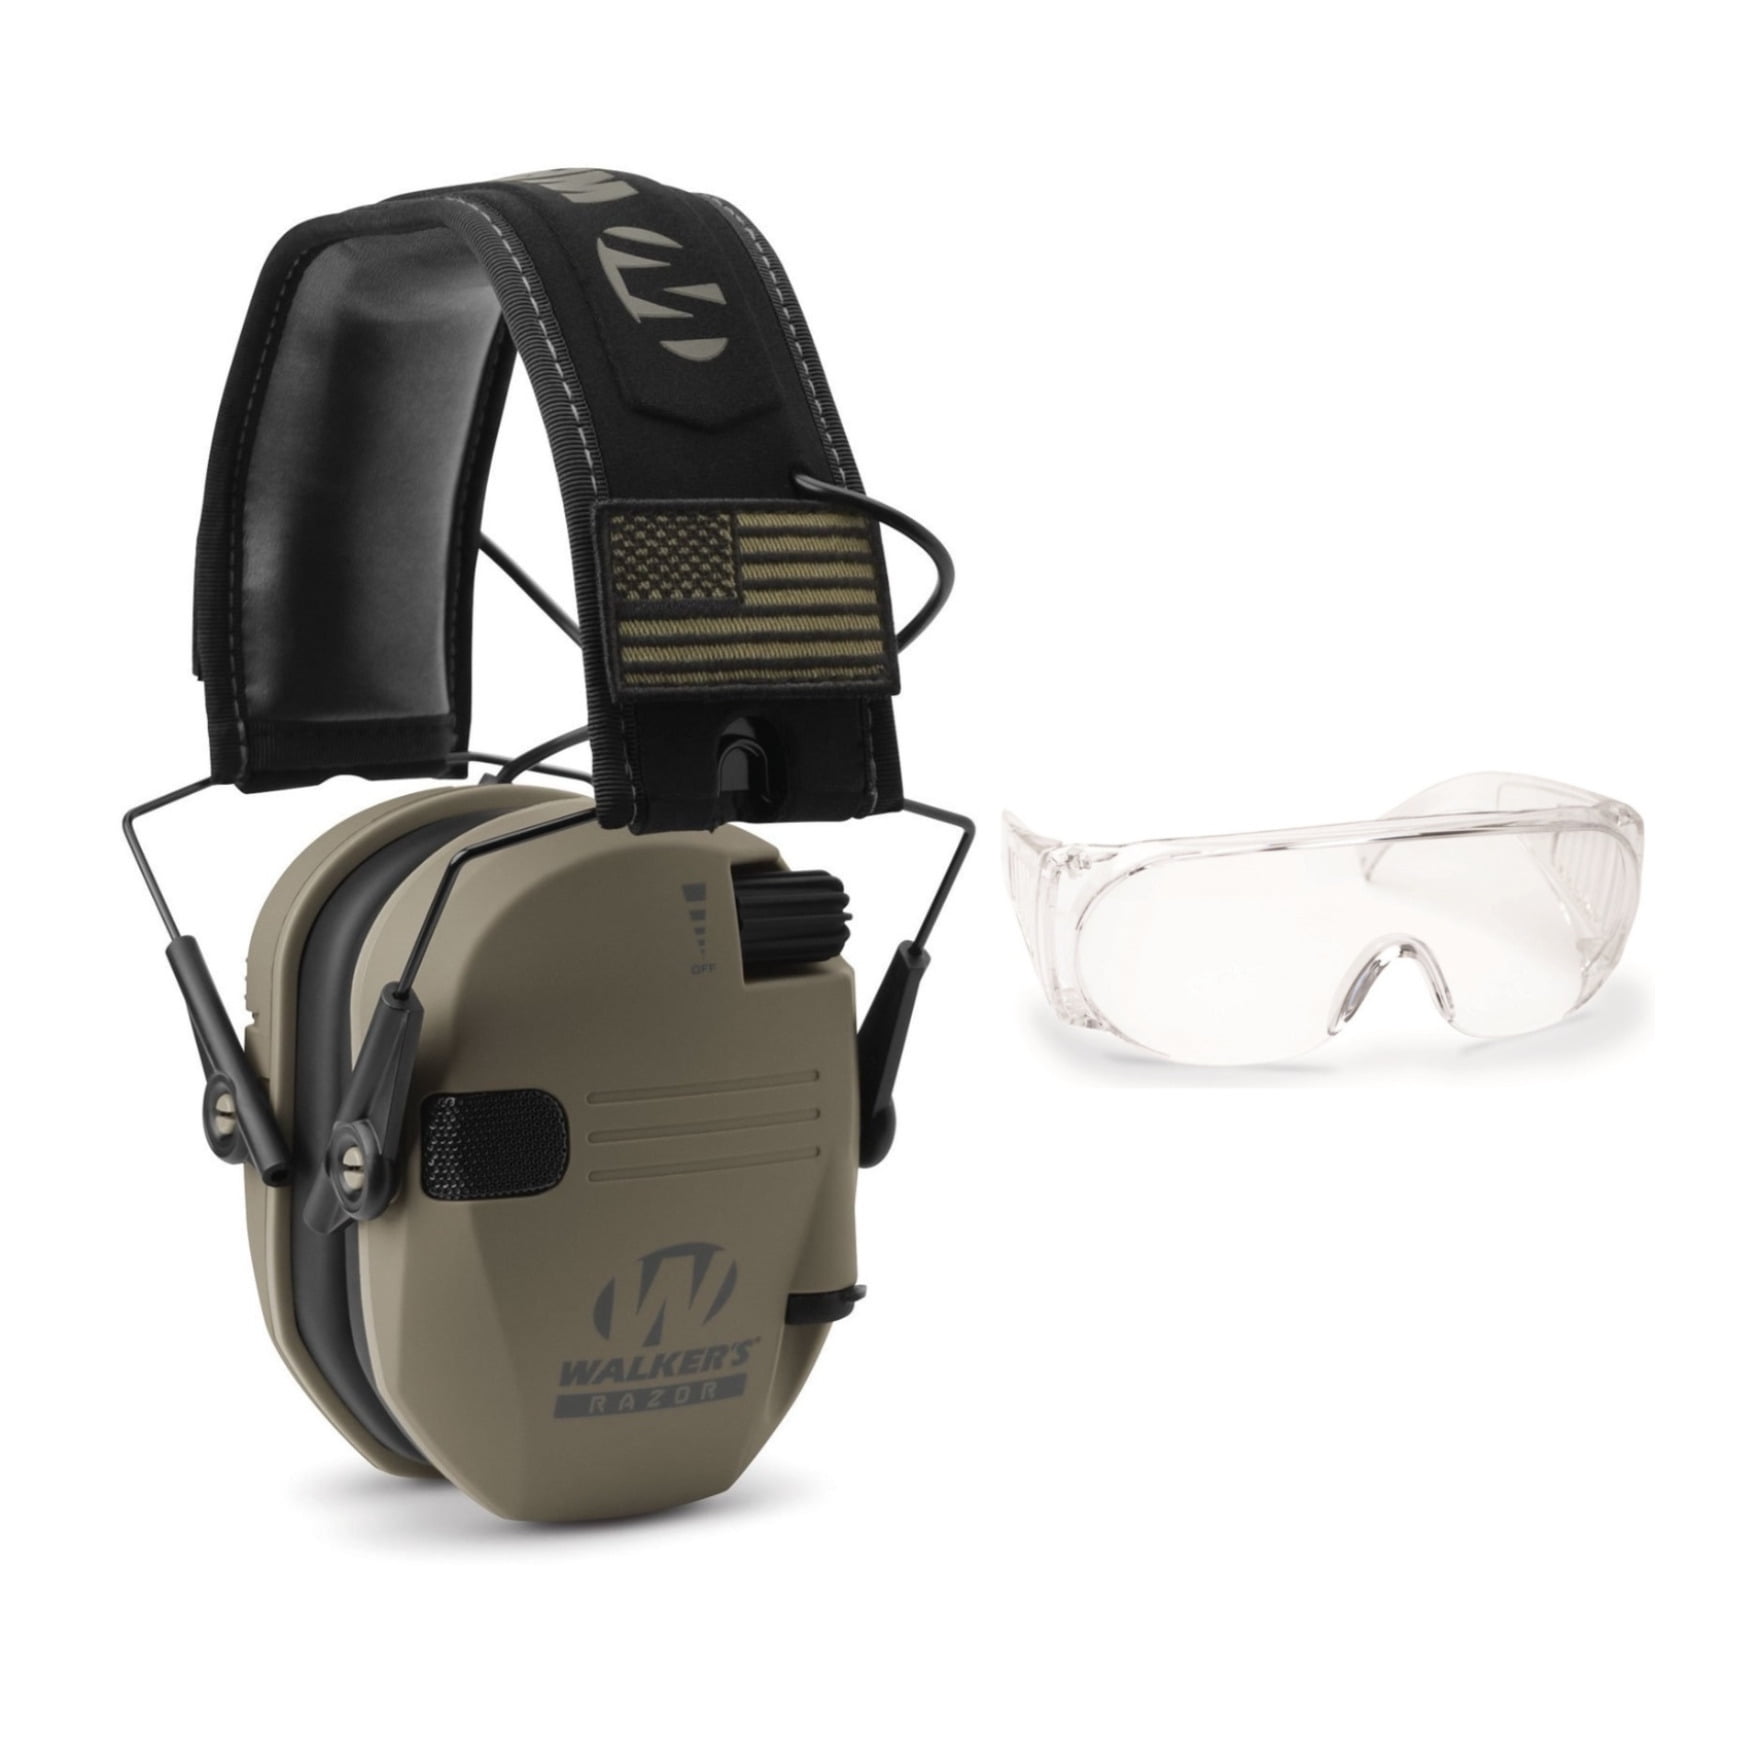 Walker's Razor Slim Electronic Muffs (FDE Patriot) with Shooting Glasses 